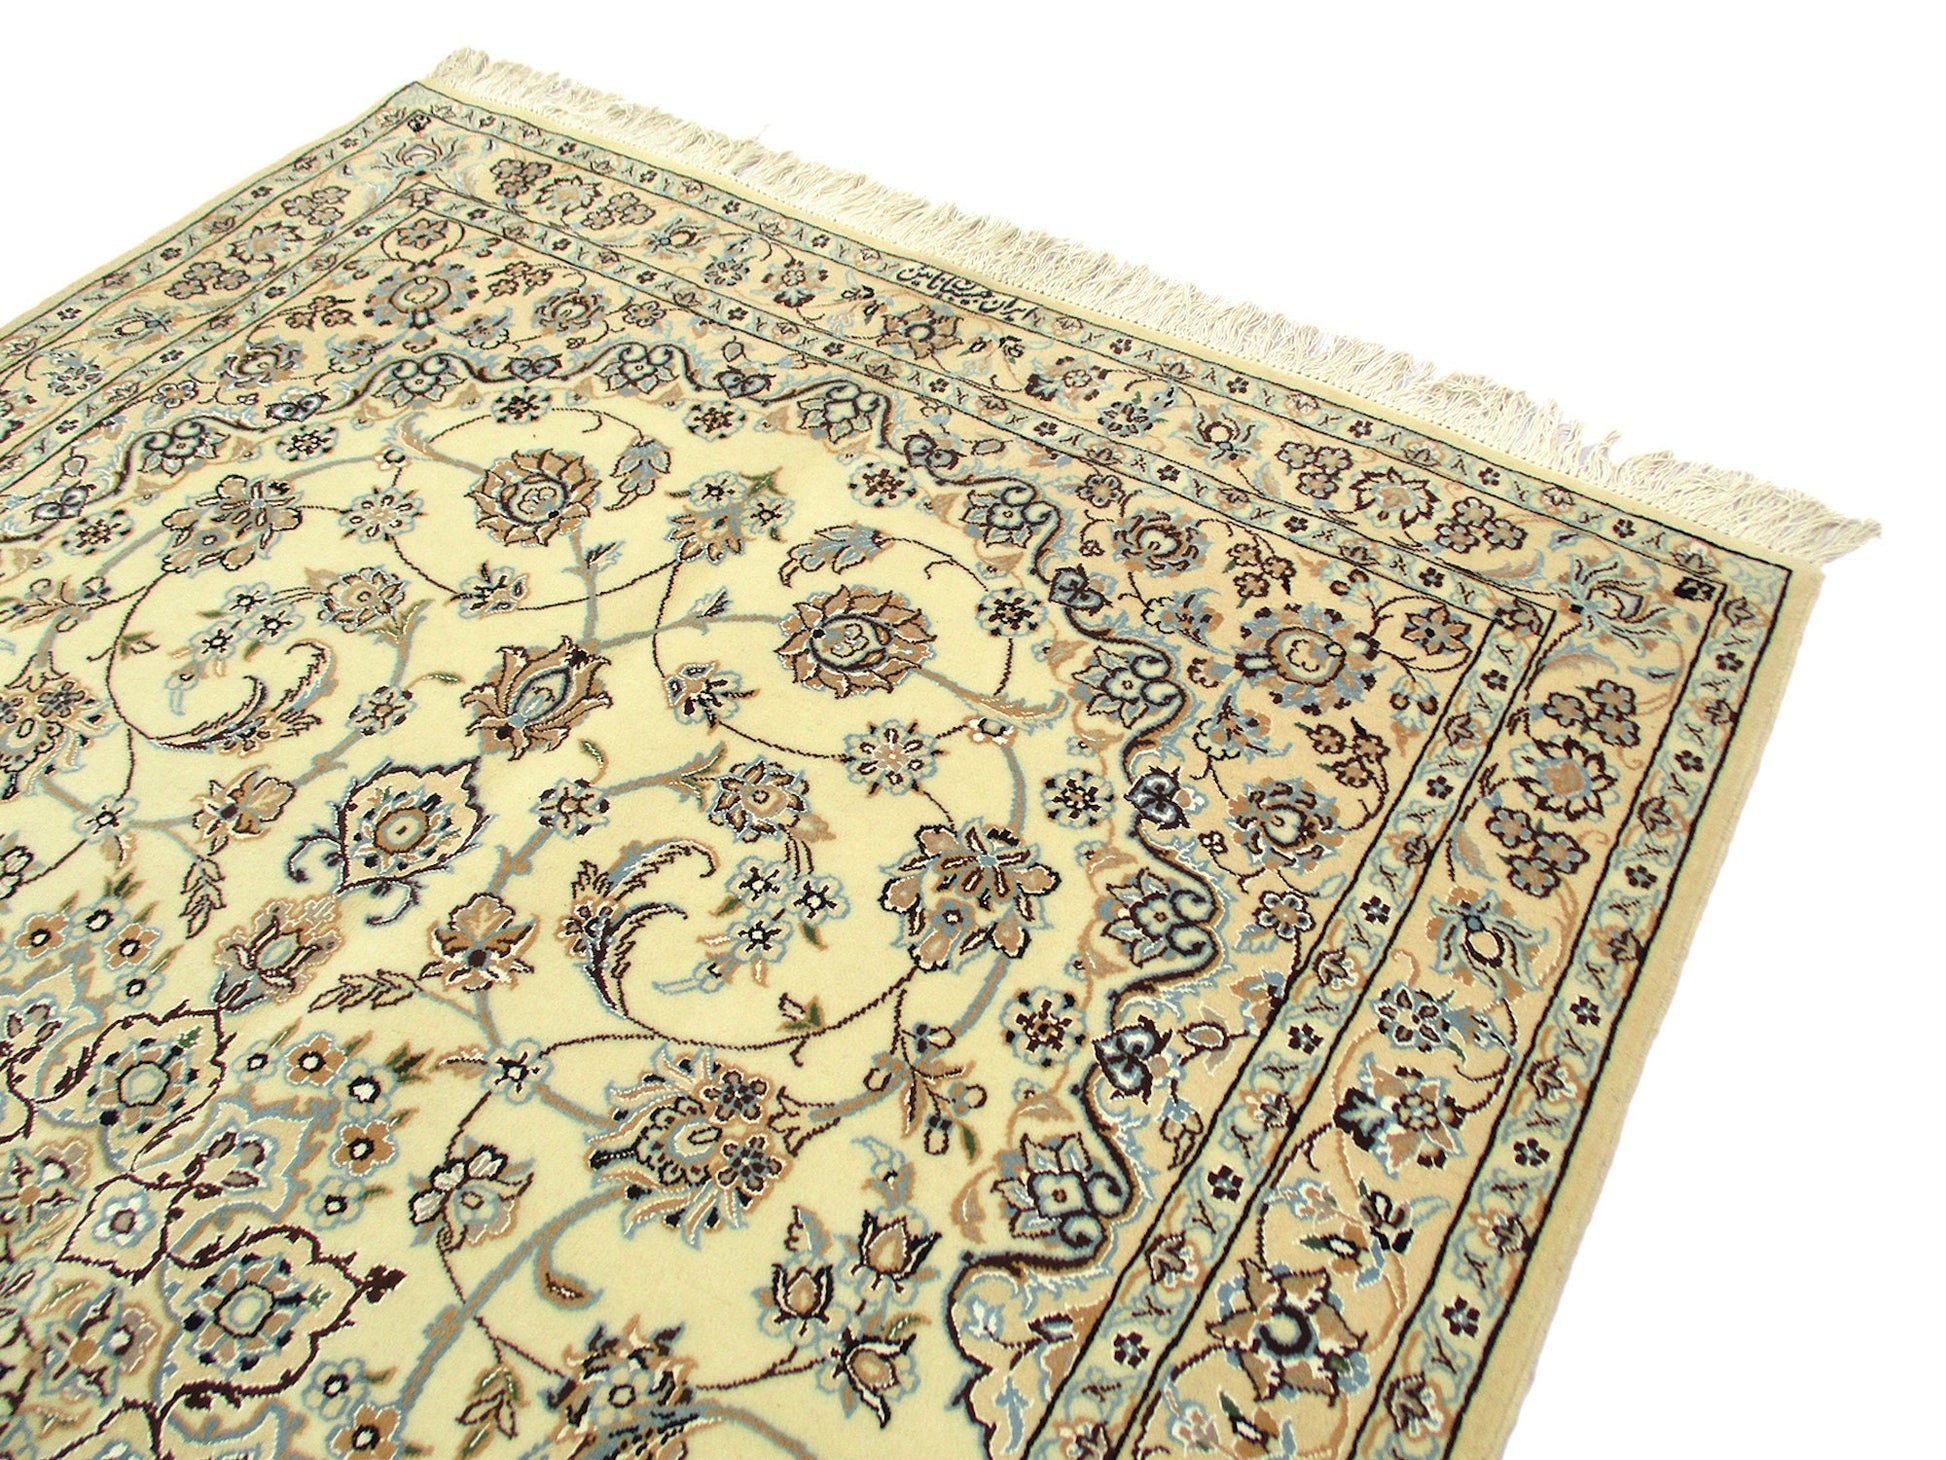 4 x 7 Feet Beige Blue Turkish Caucasian Rug | Hand Woven Area Rug | Oriental Persian Rug | Living Room Rug | Accent Floral Pattern Wool Rug